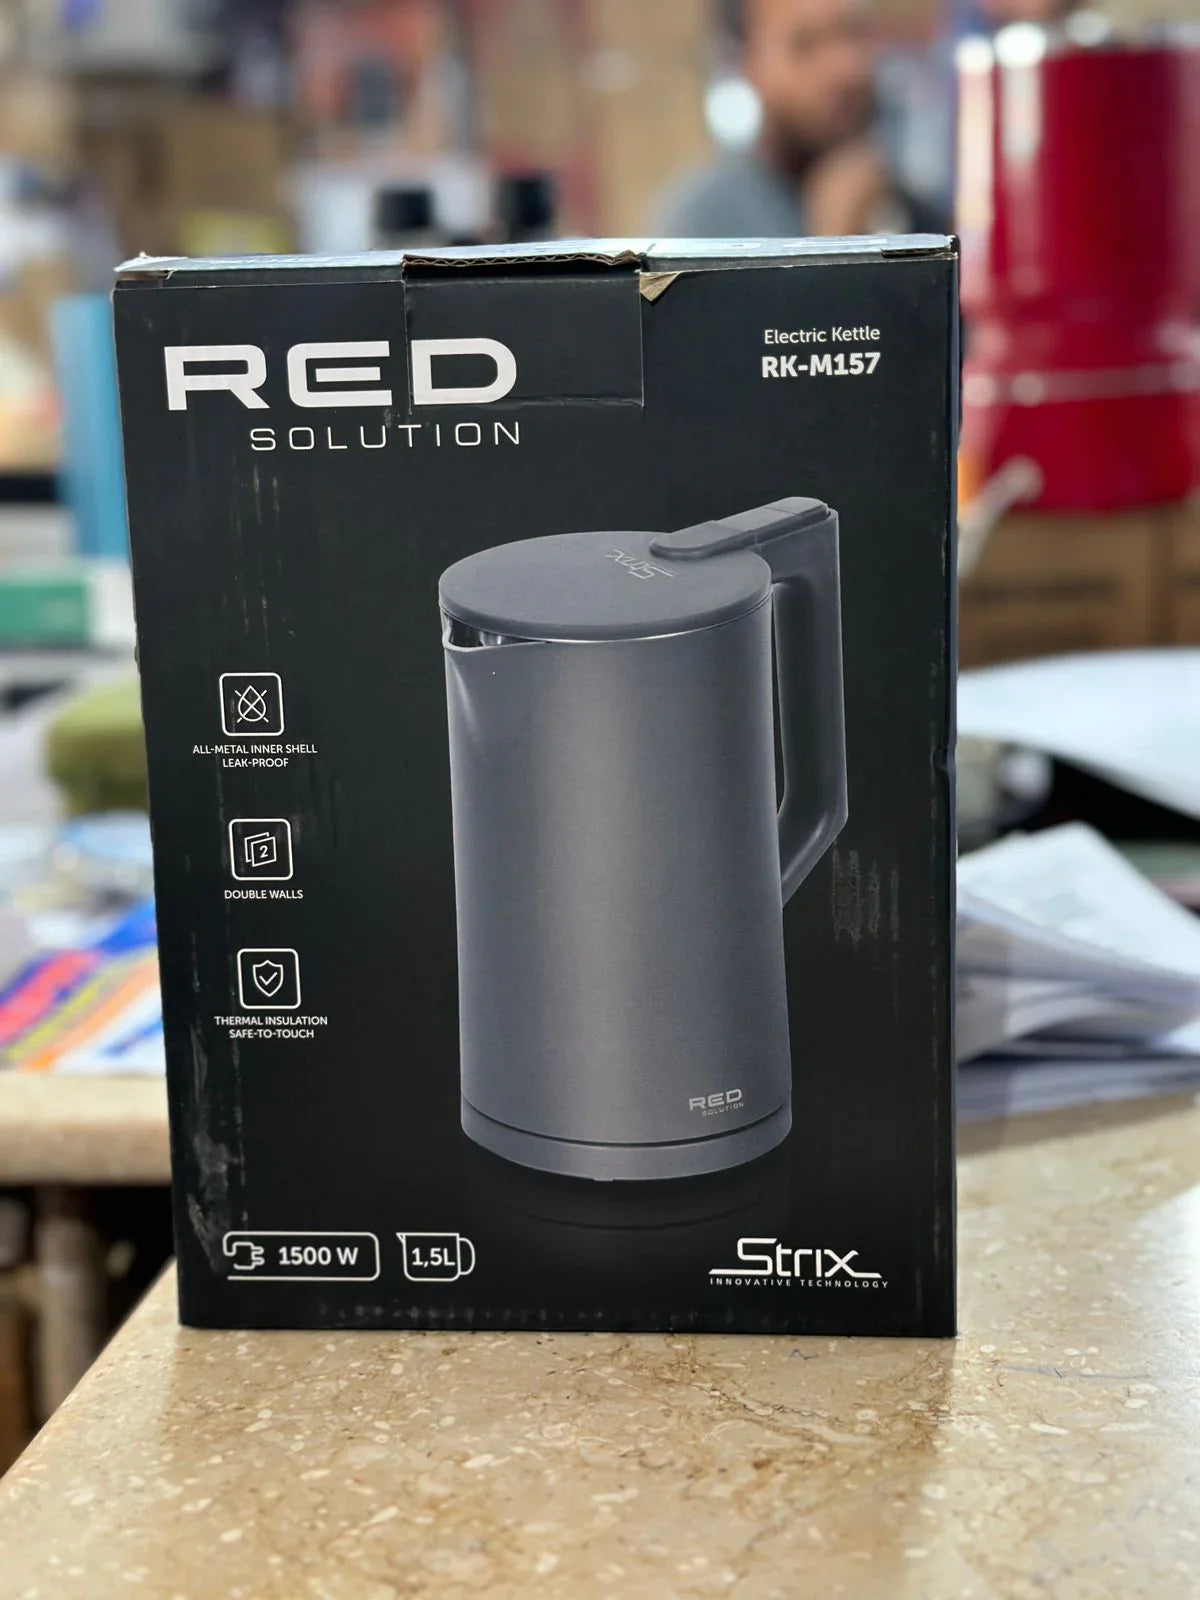 RED SOLUTION ELECTRIC KETTLE RK-M157